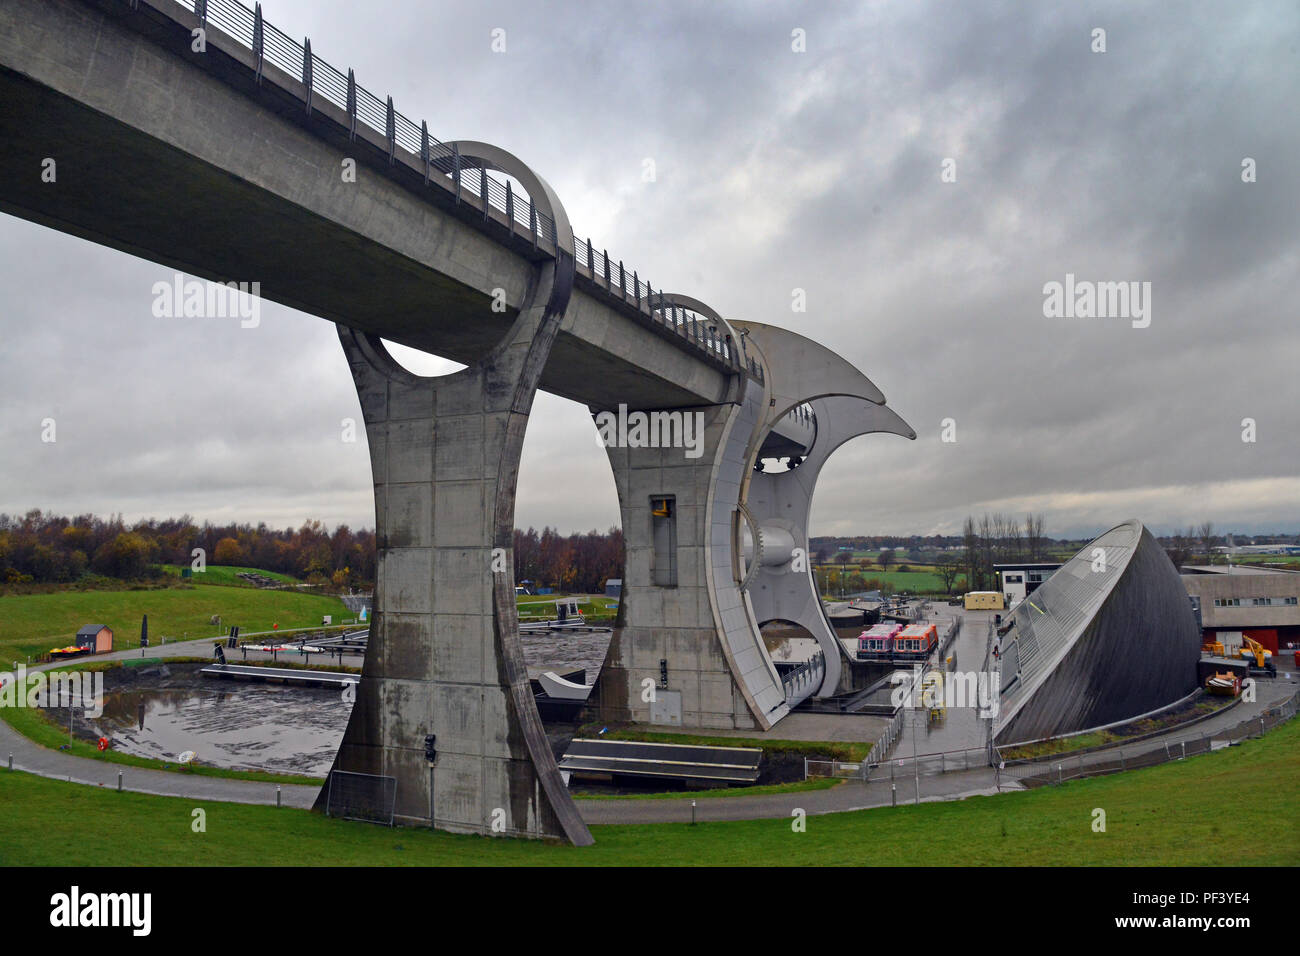 The Falkirk Wheel, a rotating boat lift  linking the Forth and Clyde Canal to the Union Canalillenium Link Project Stock Photo